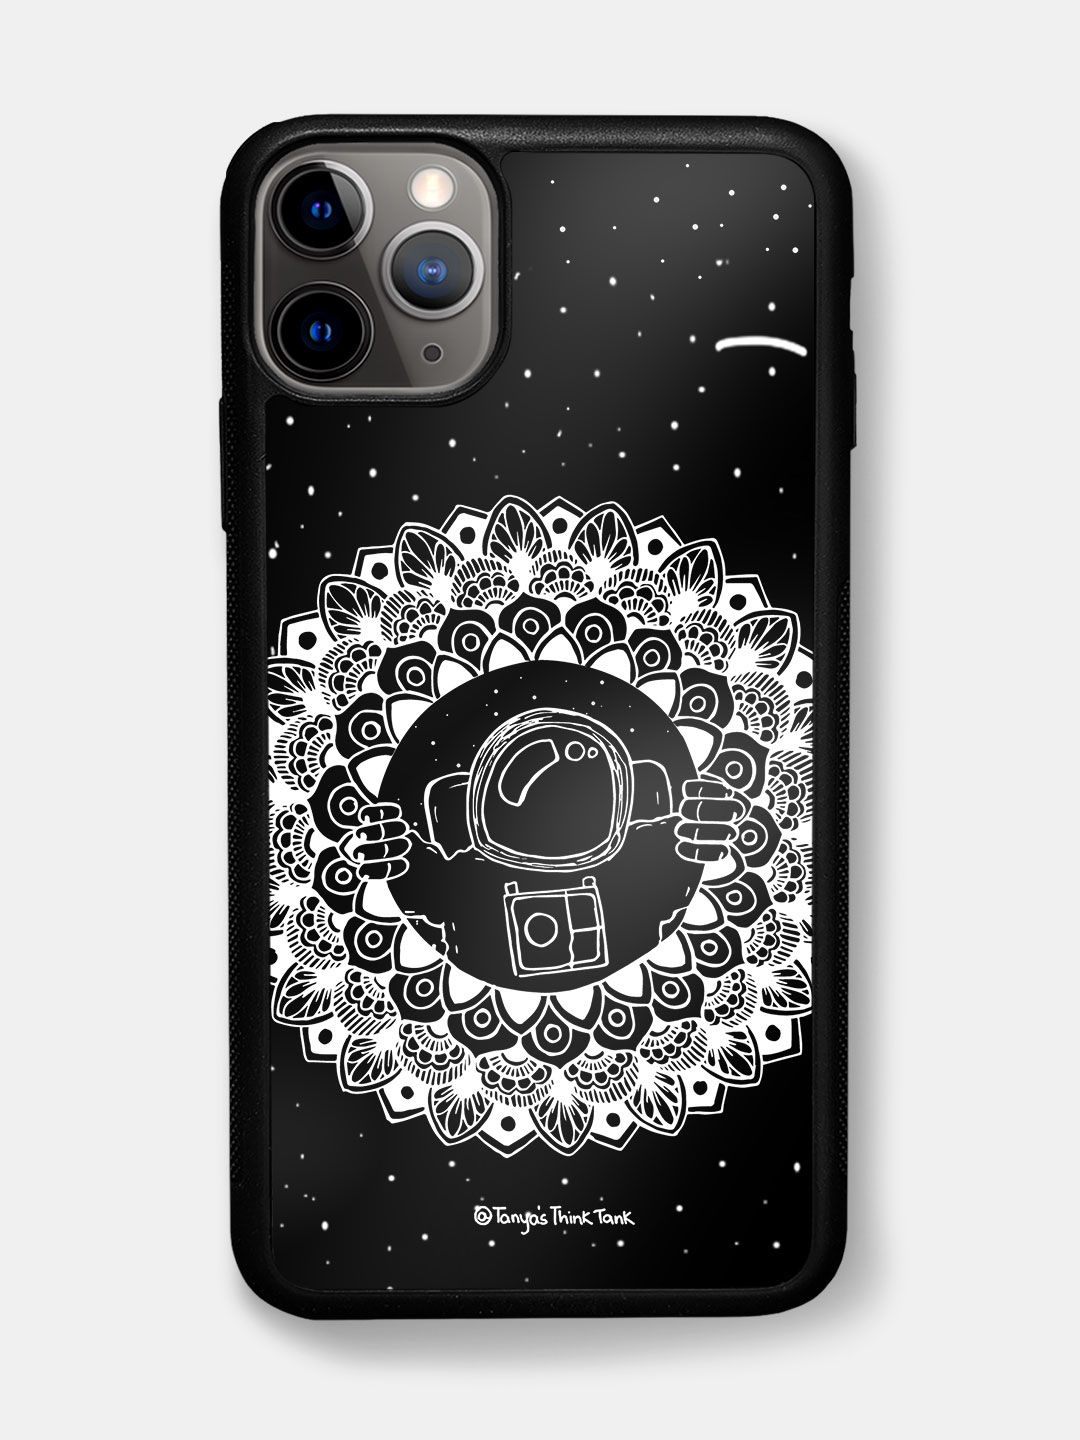 Buy Astronaut White - Bumper Phone Case for iPhone 11 Pro Phone Cases & Covers Online